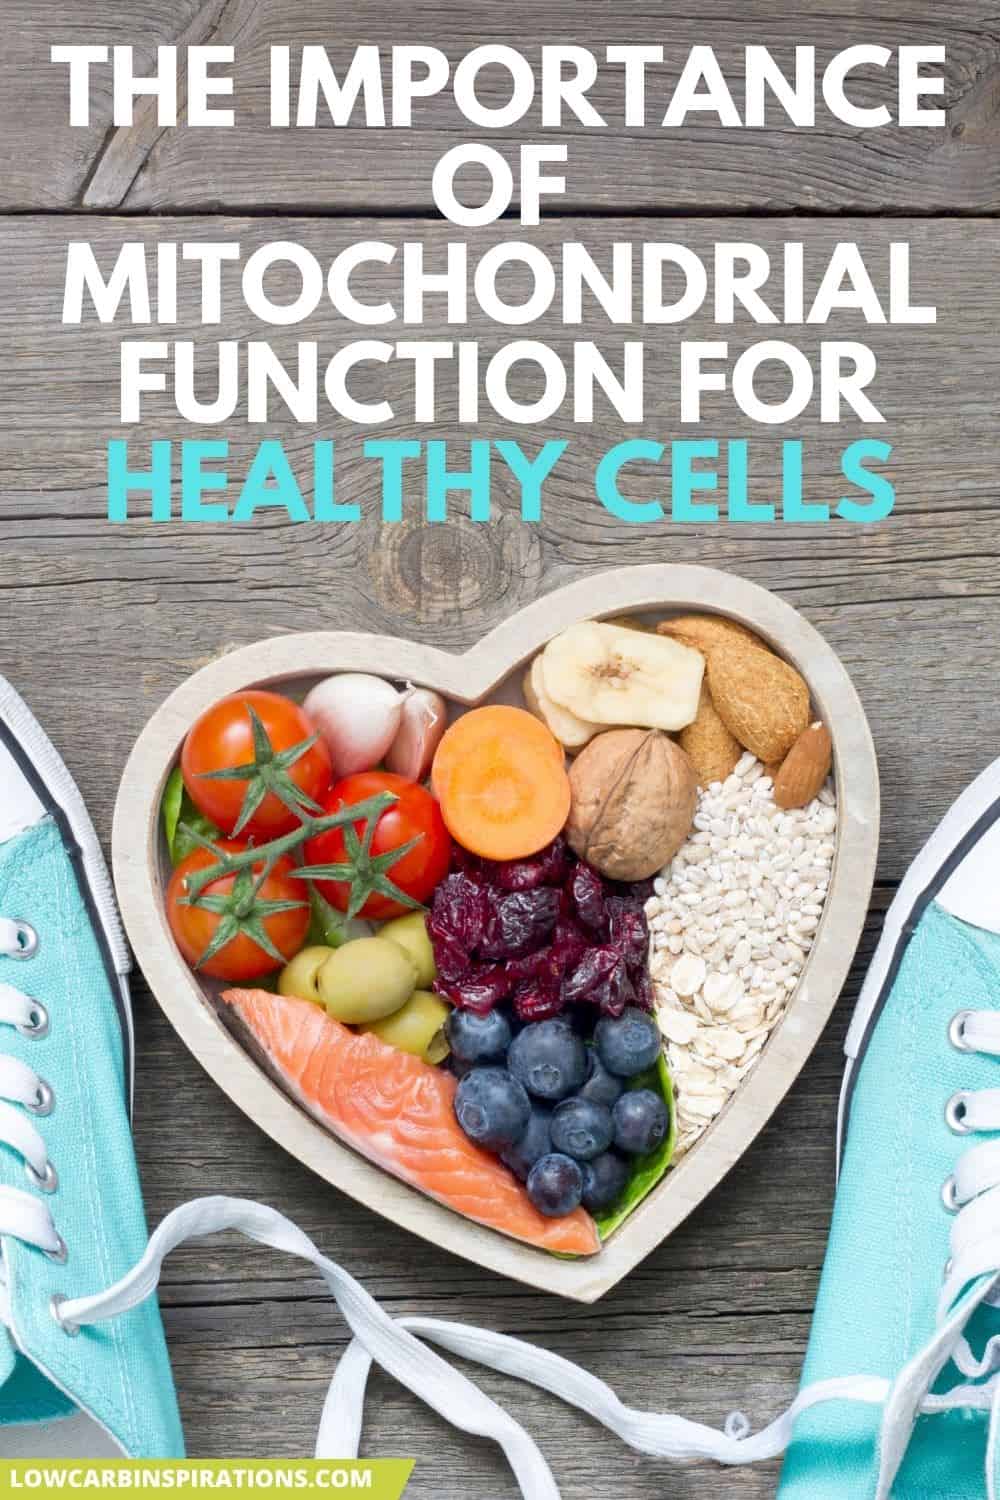 The Importance of Mitochondrial Function for Healthy Cells